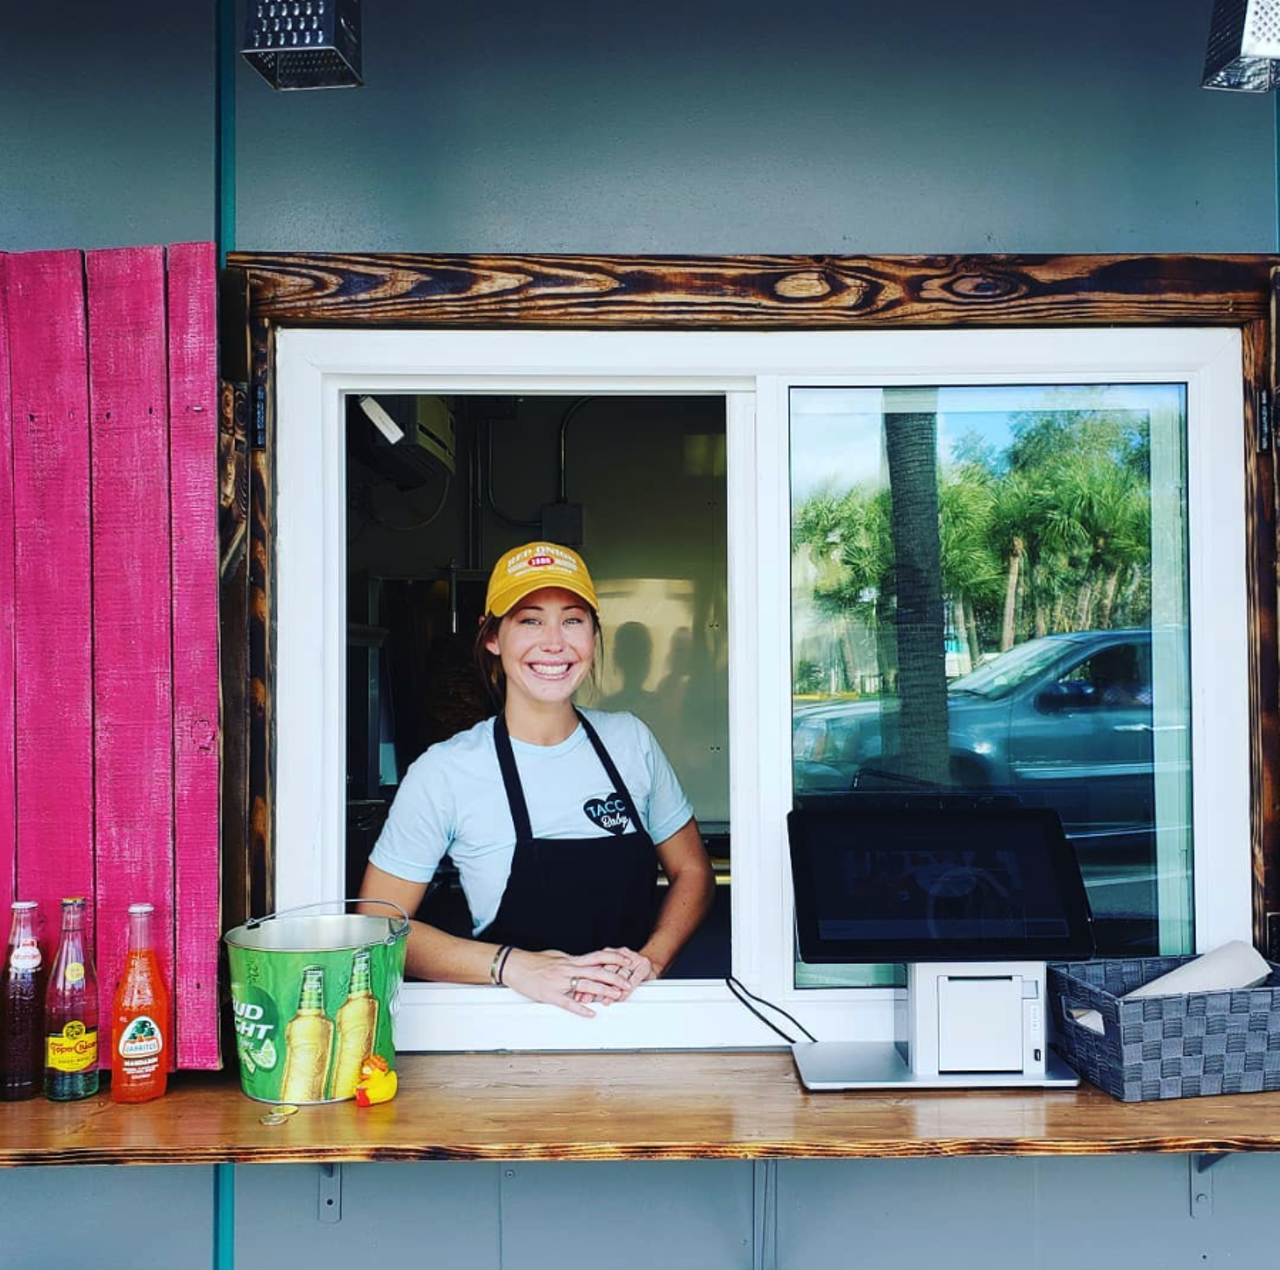 Taco Baby  
235 Main Street, Dunedin
Slinging from scratch al pastor tacos out of a renovated ATM machine, it&#146;s safe to say Taco Baby takes the cake when it comes to tiny restaurants. Snag a $3 street taco and make your way down Main Street.
Photo via Taco Baby/ Instagram 